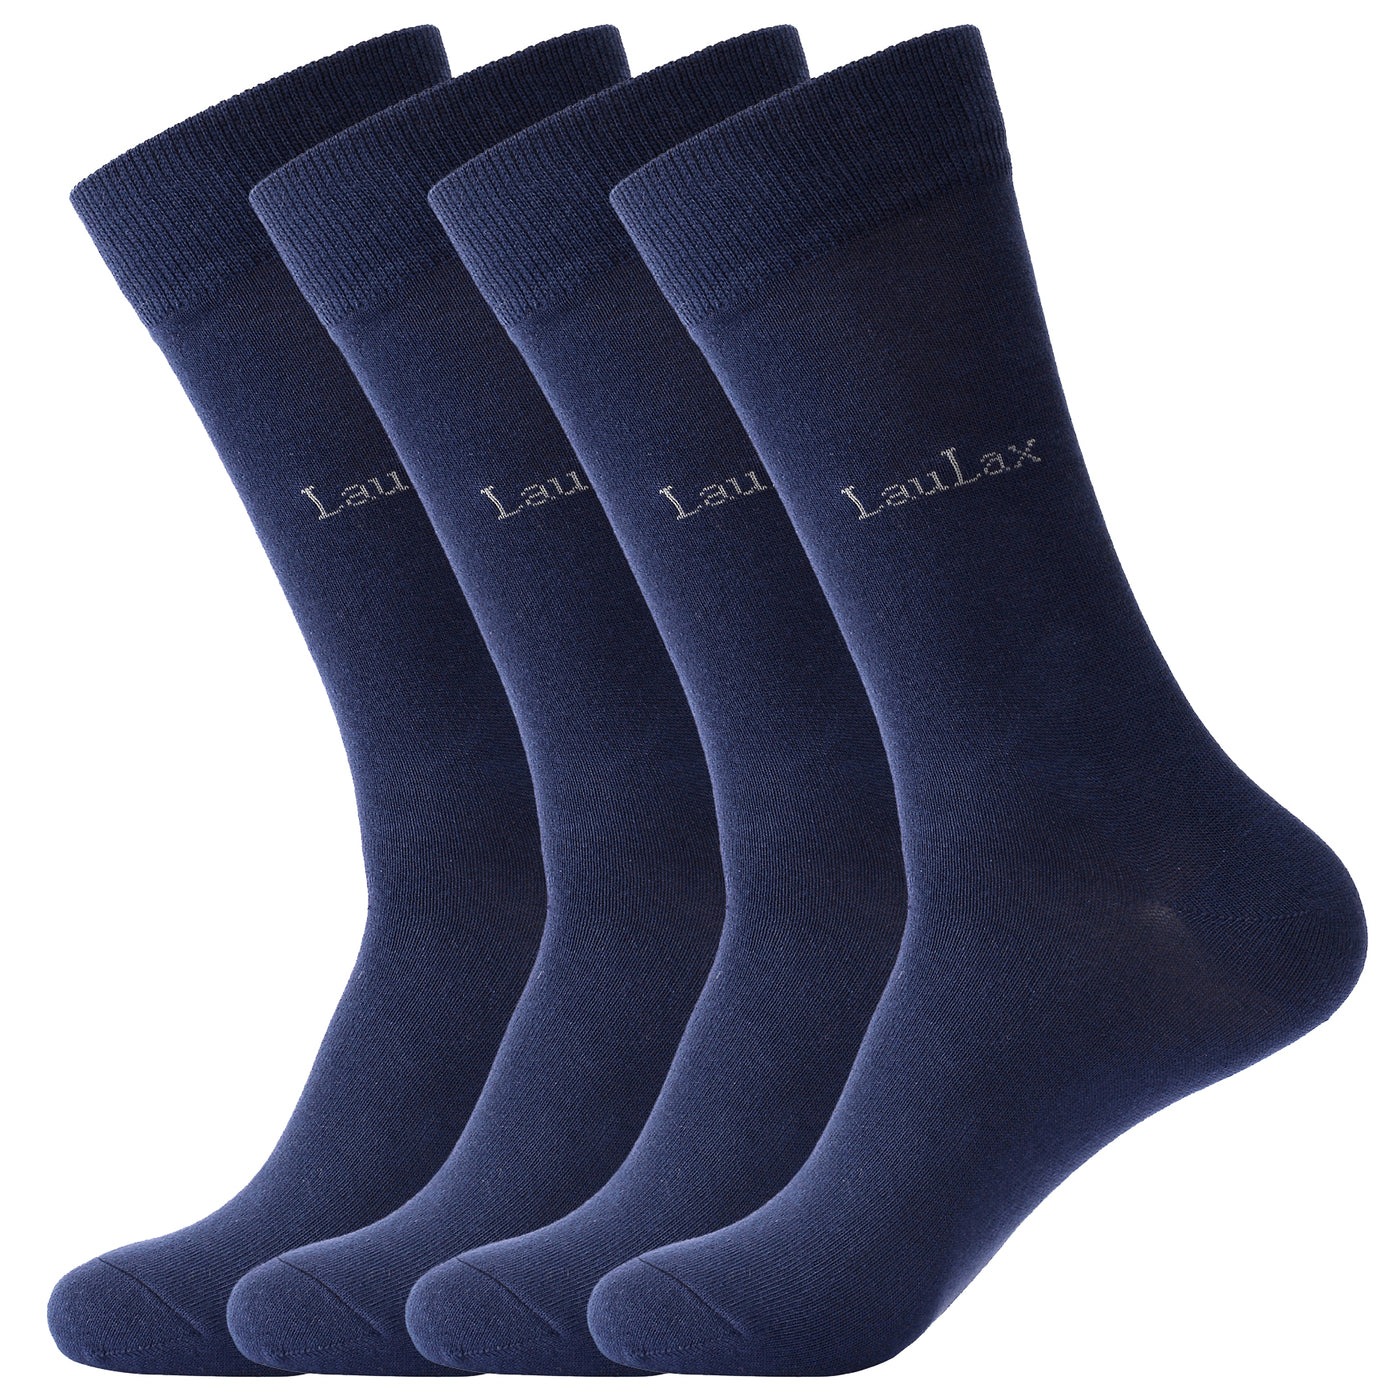 Laulax 4 Pairs High Quality Finest Combed Cotton Dress Socks, Navy, Gift Set